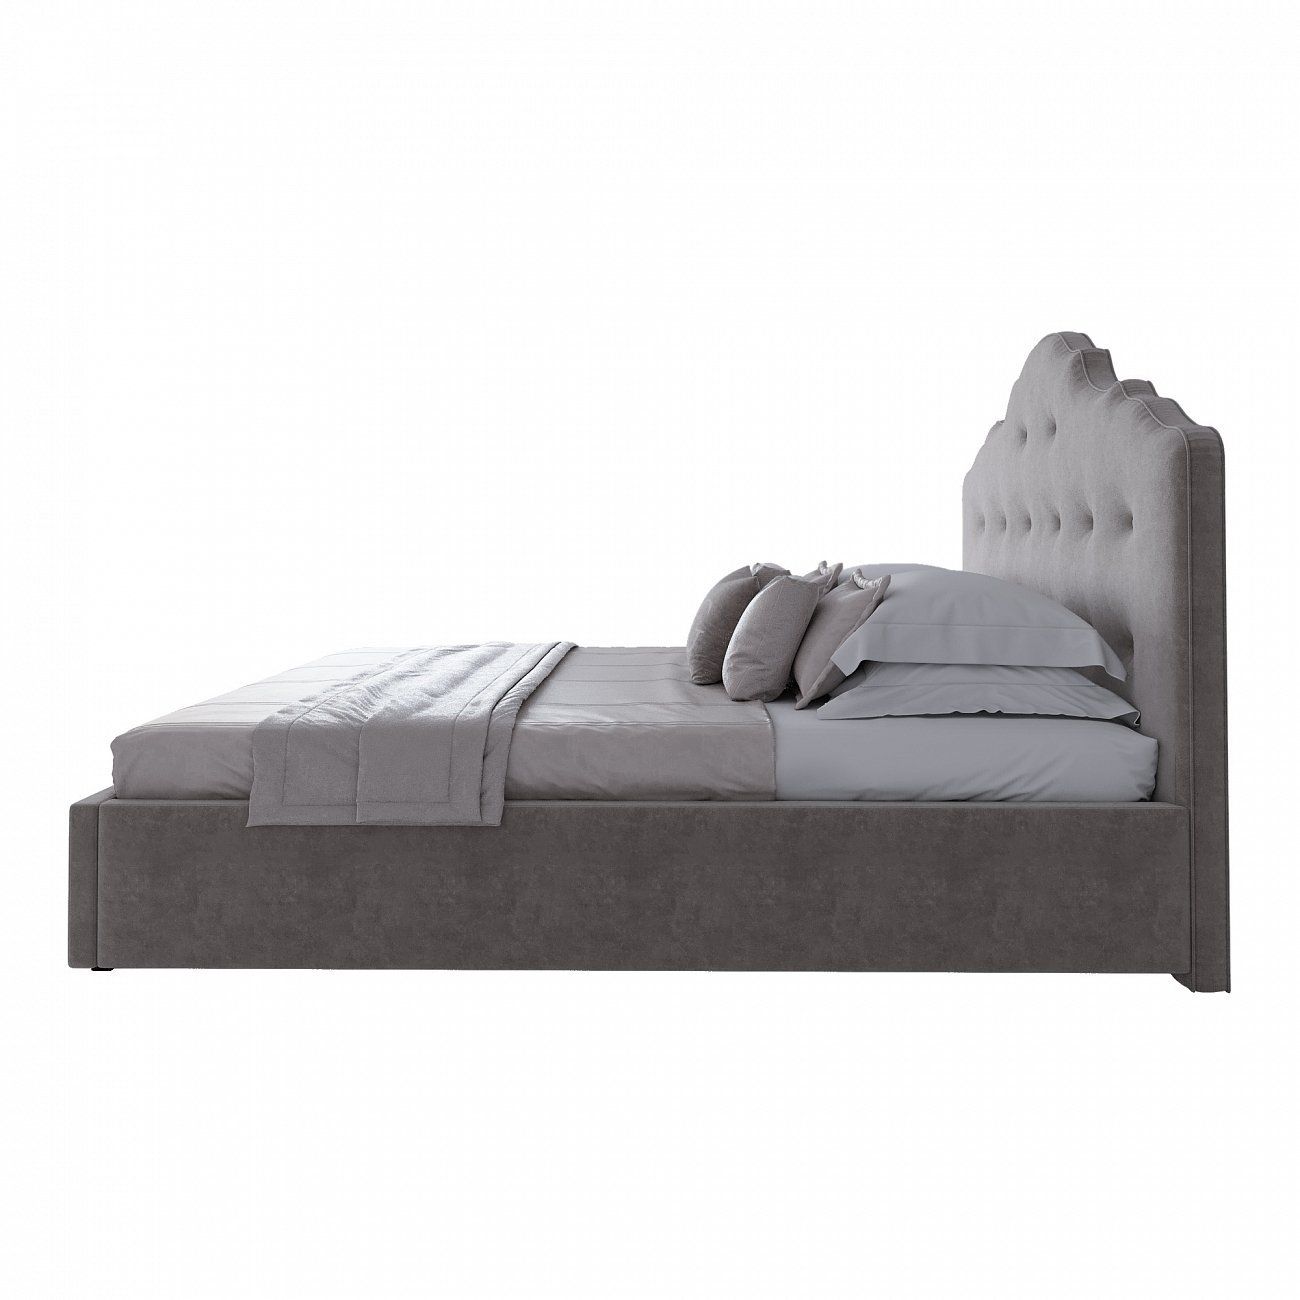 The bed is large 200x200 Palace grey